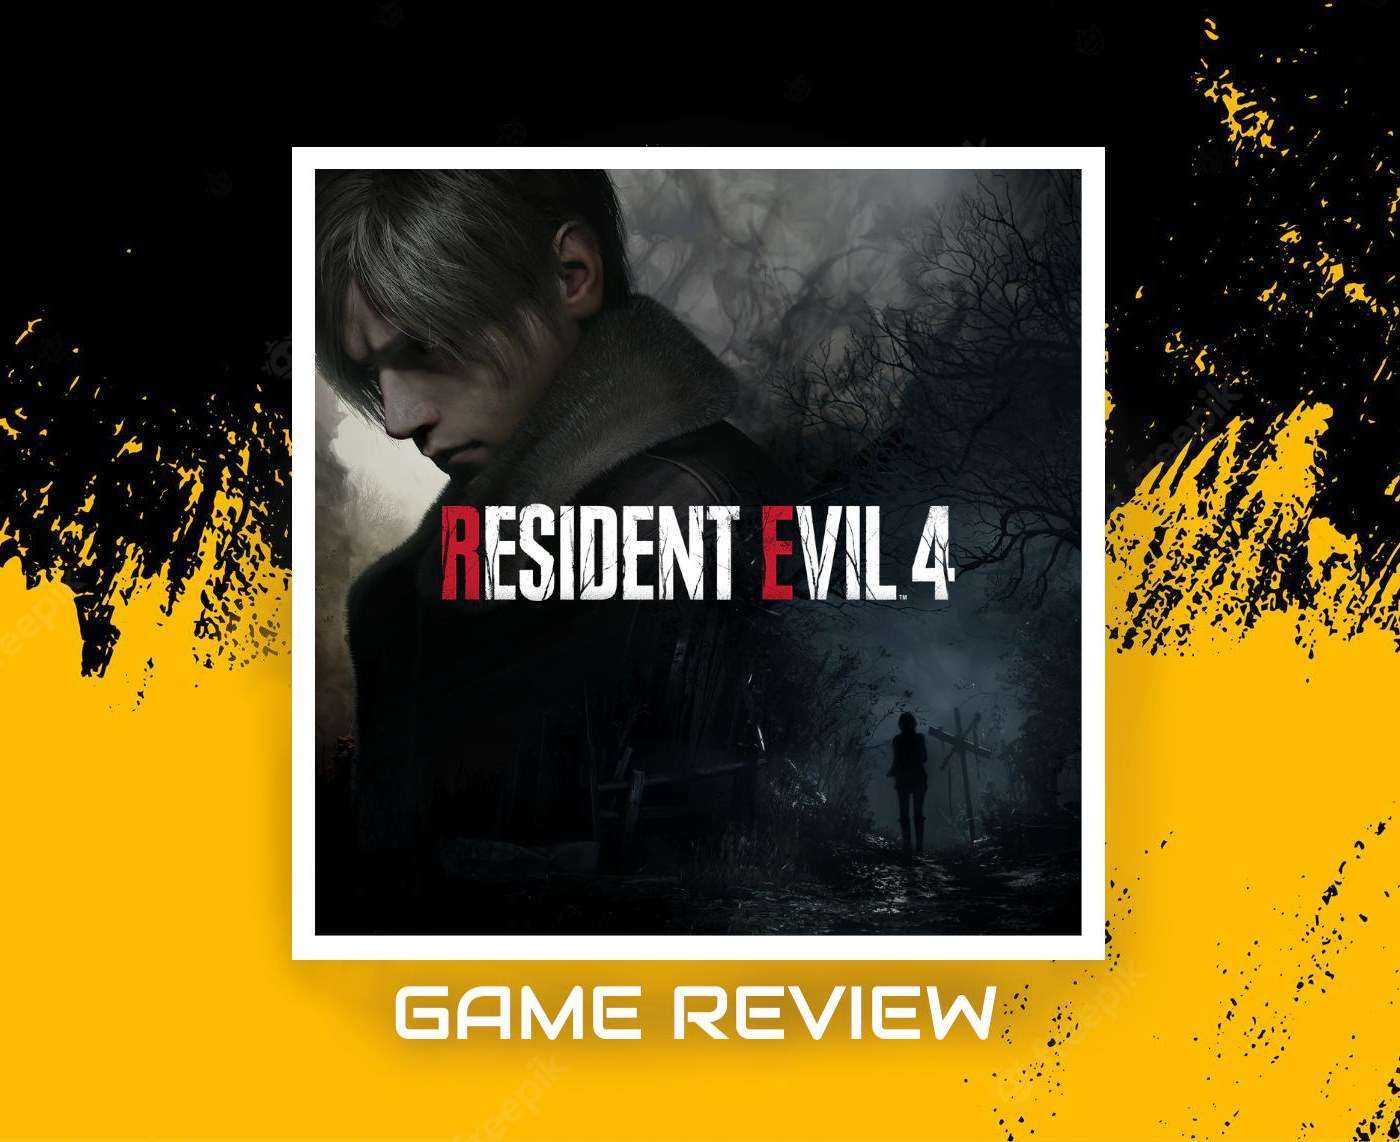 Resident Evil 4 game review